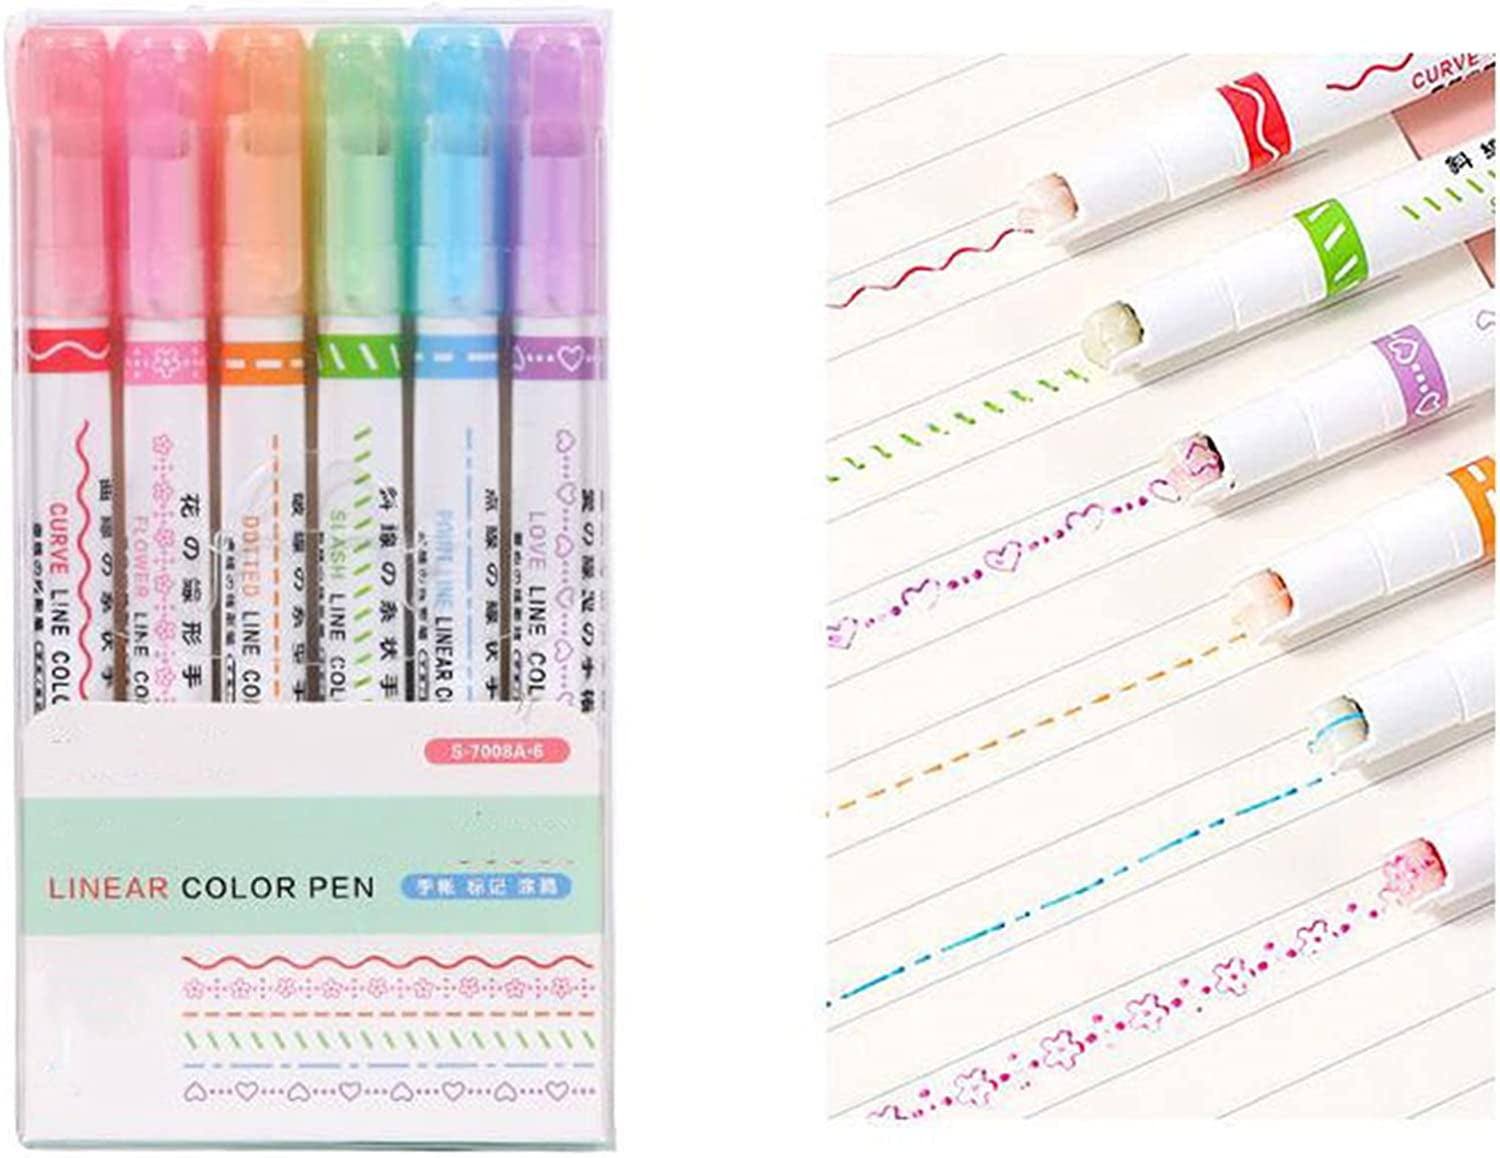  Juszok 6 Colored Curve Highlighter Pen Set, 7